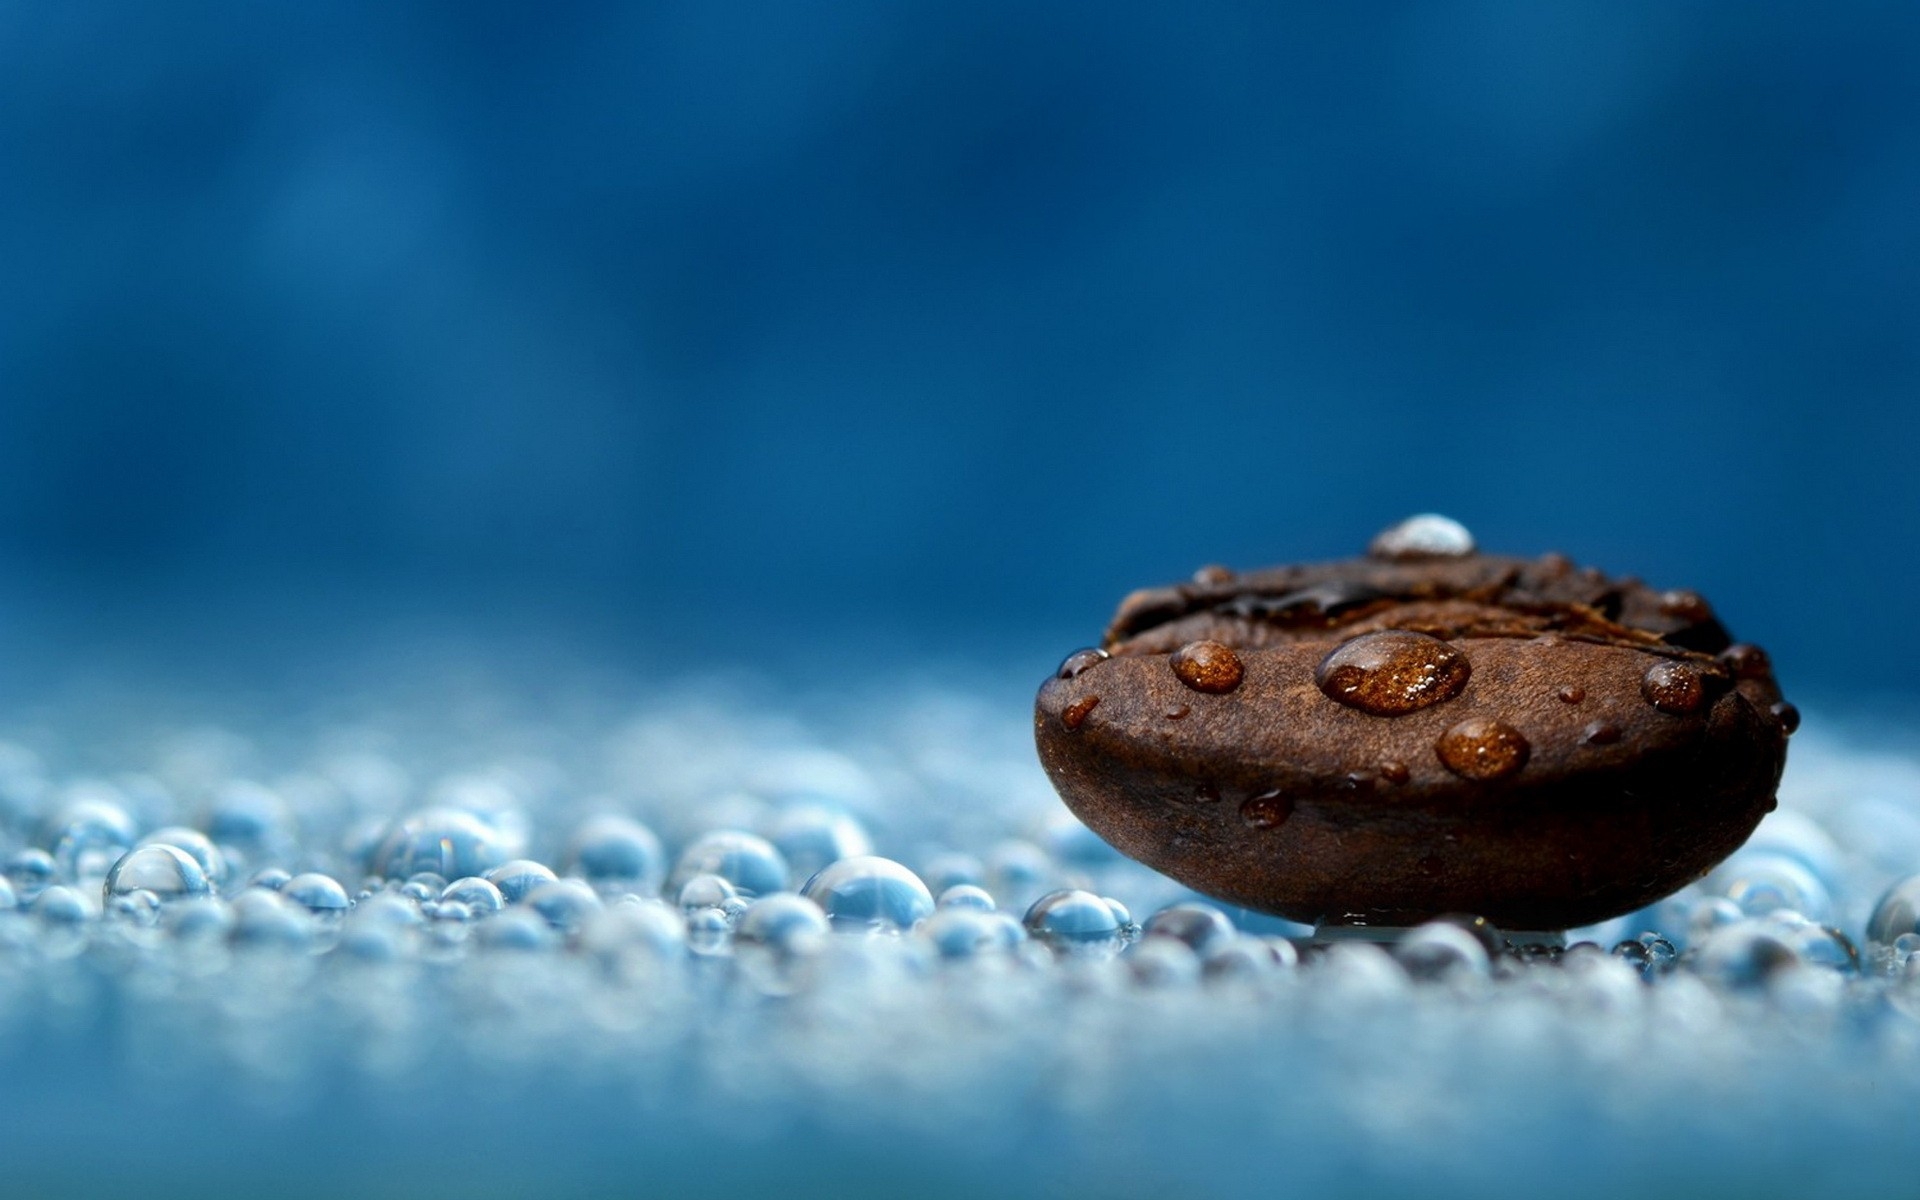 Water droplets on a coffee bean